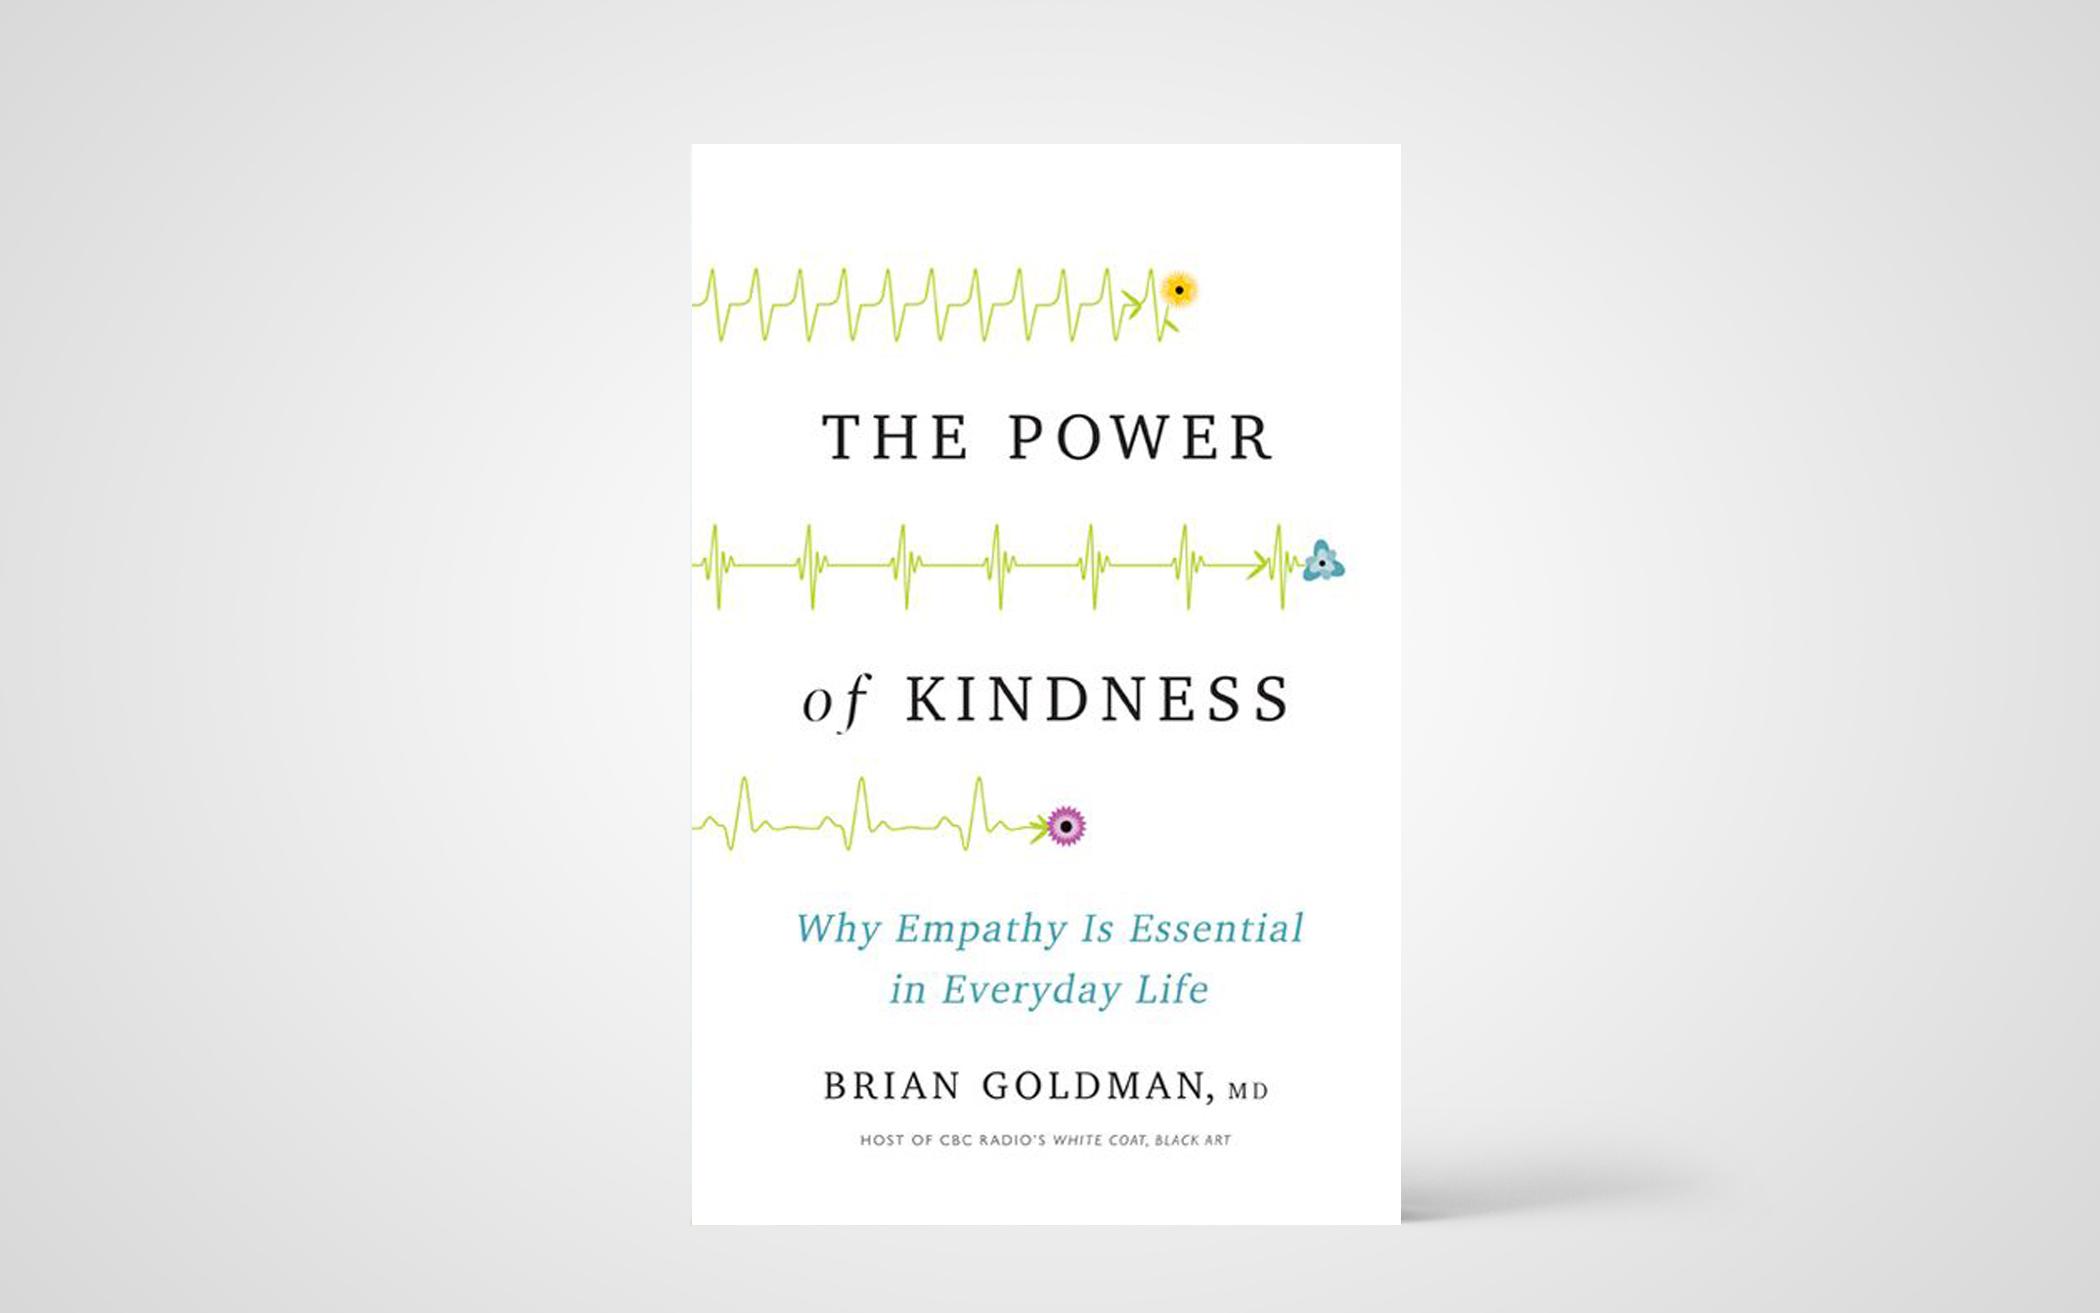 The Power of Kindness: Why Empathy Is Essential to Everyday Life